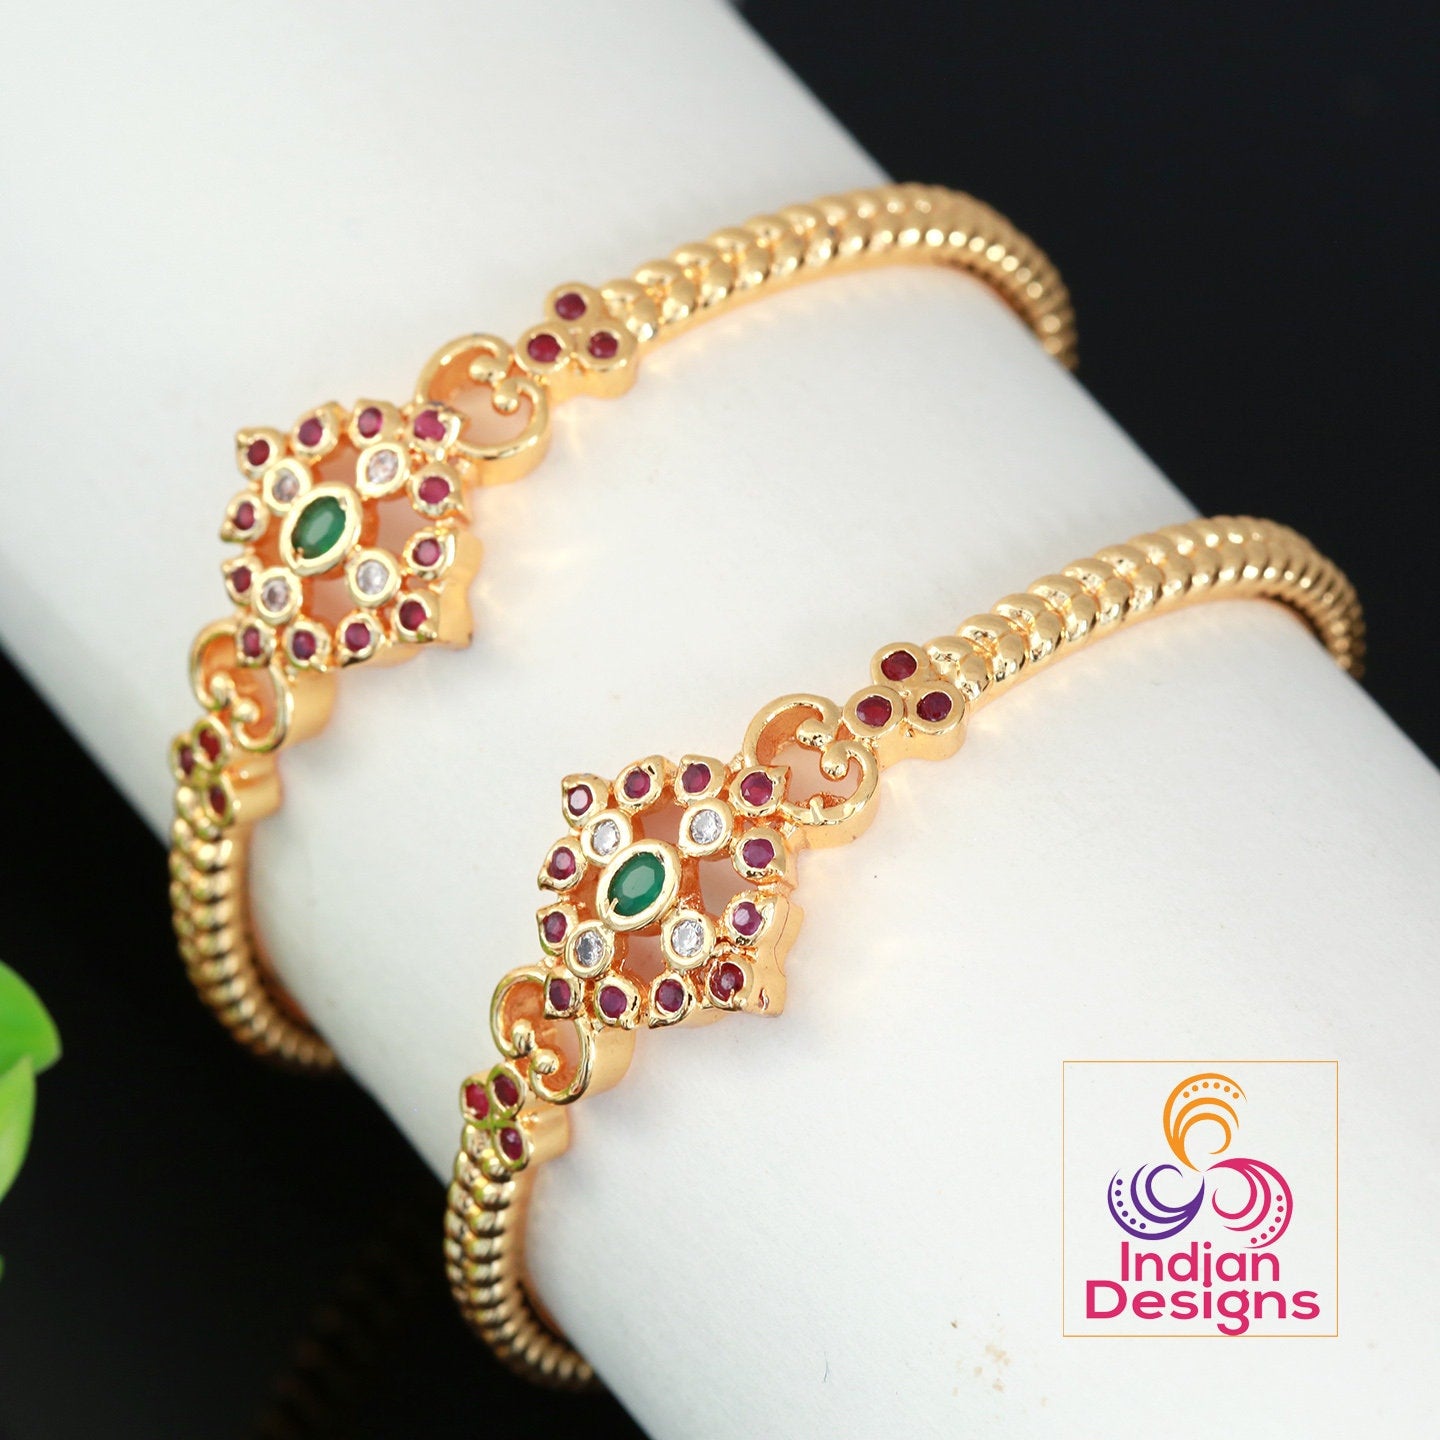 Gold plated American diamond bangles with Low price | South Indian bangles design | Ruby stone bangles design | Gold bangle design daily use